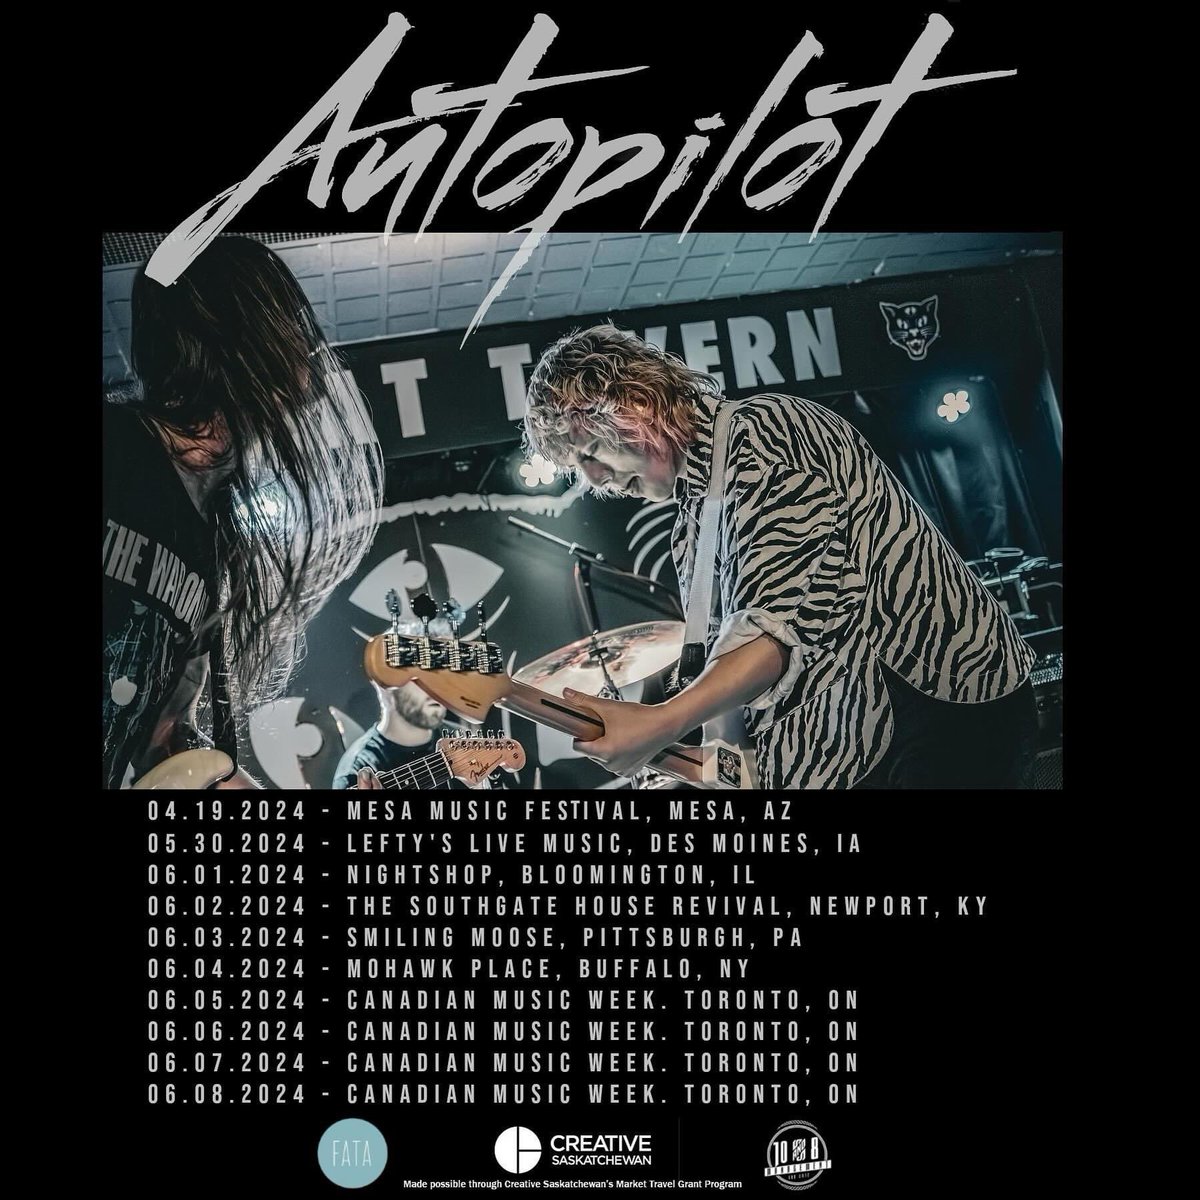 My friends and clients @bandautopilot have a nice run of shows and festivals coming up! Shout out to @FATABooking and @creativesask for all the help and support!